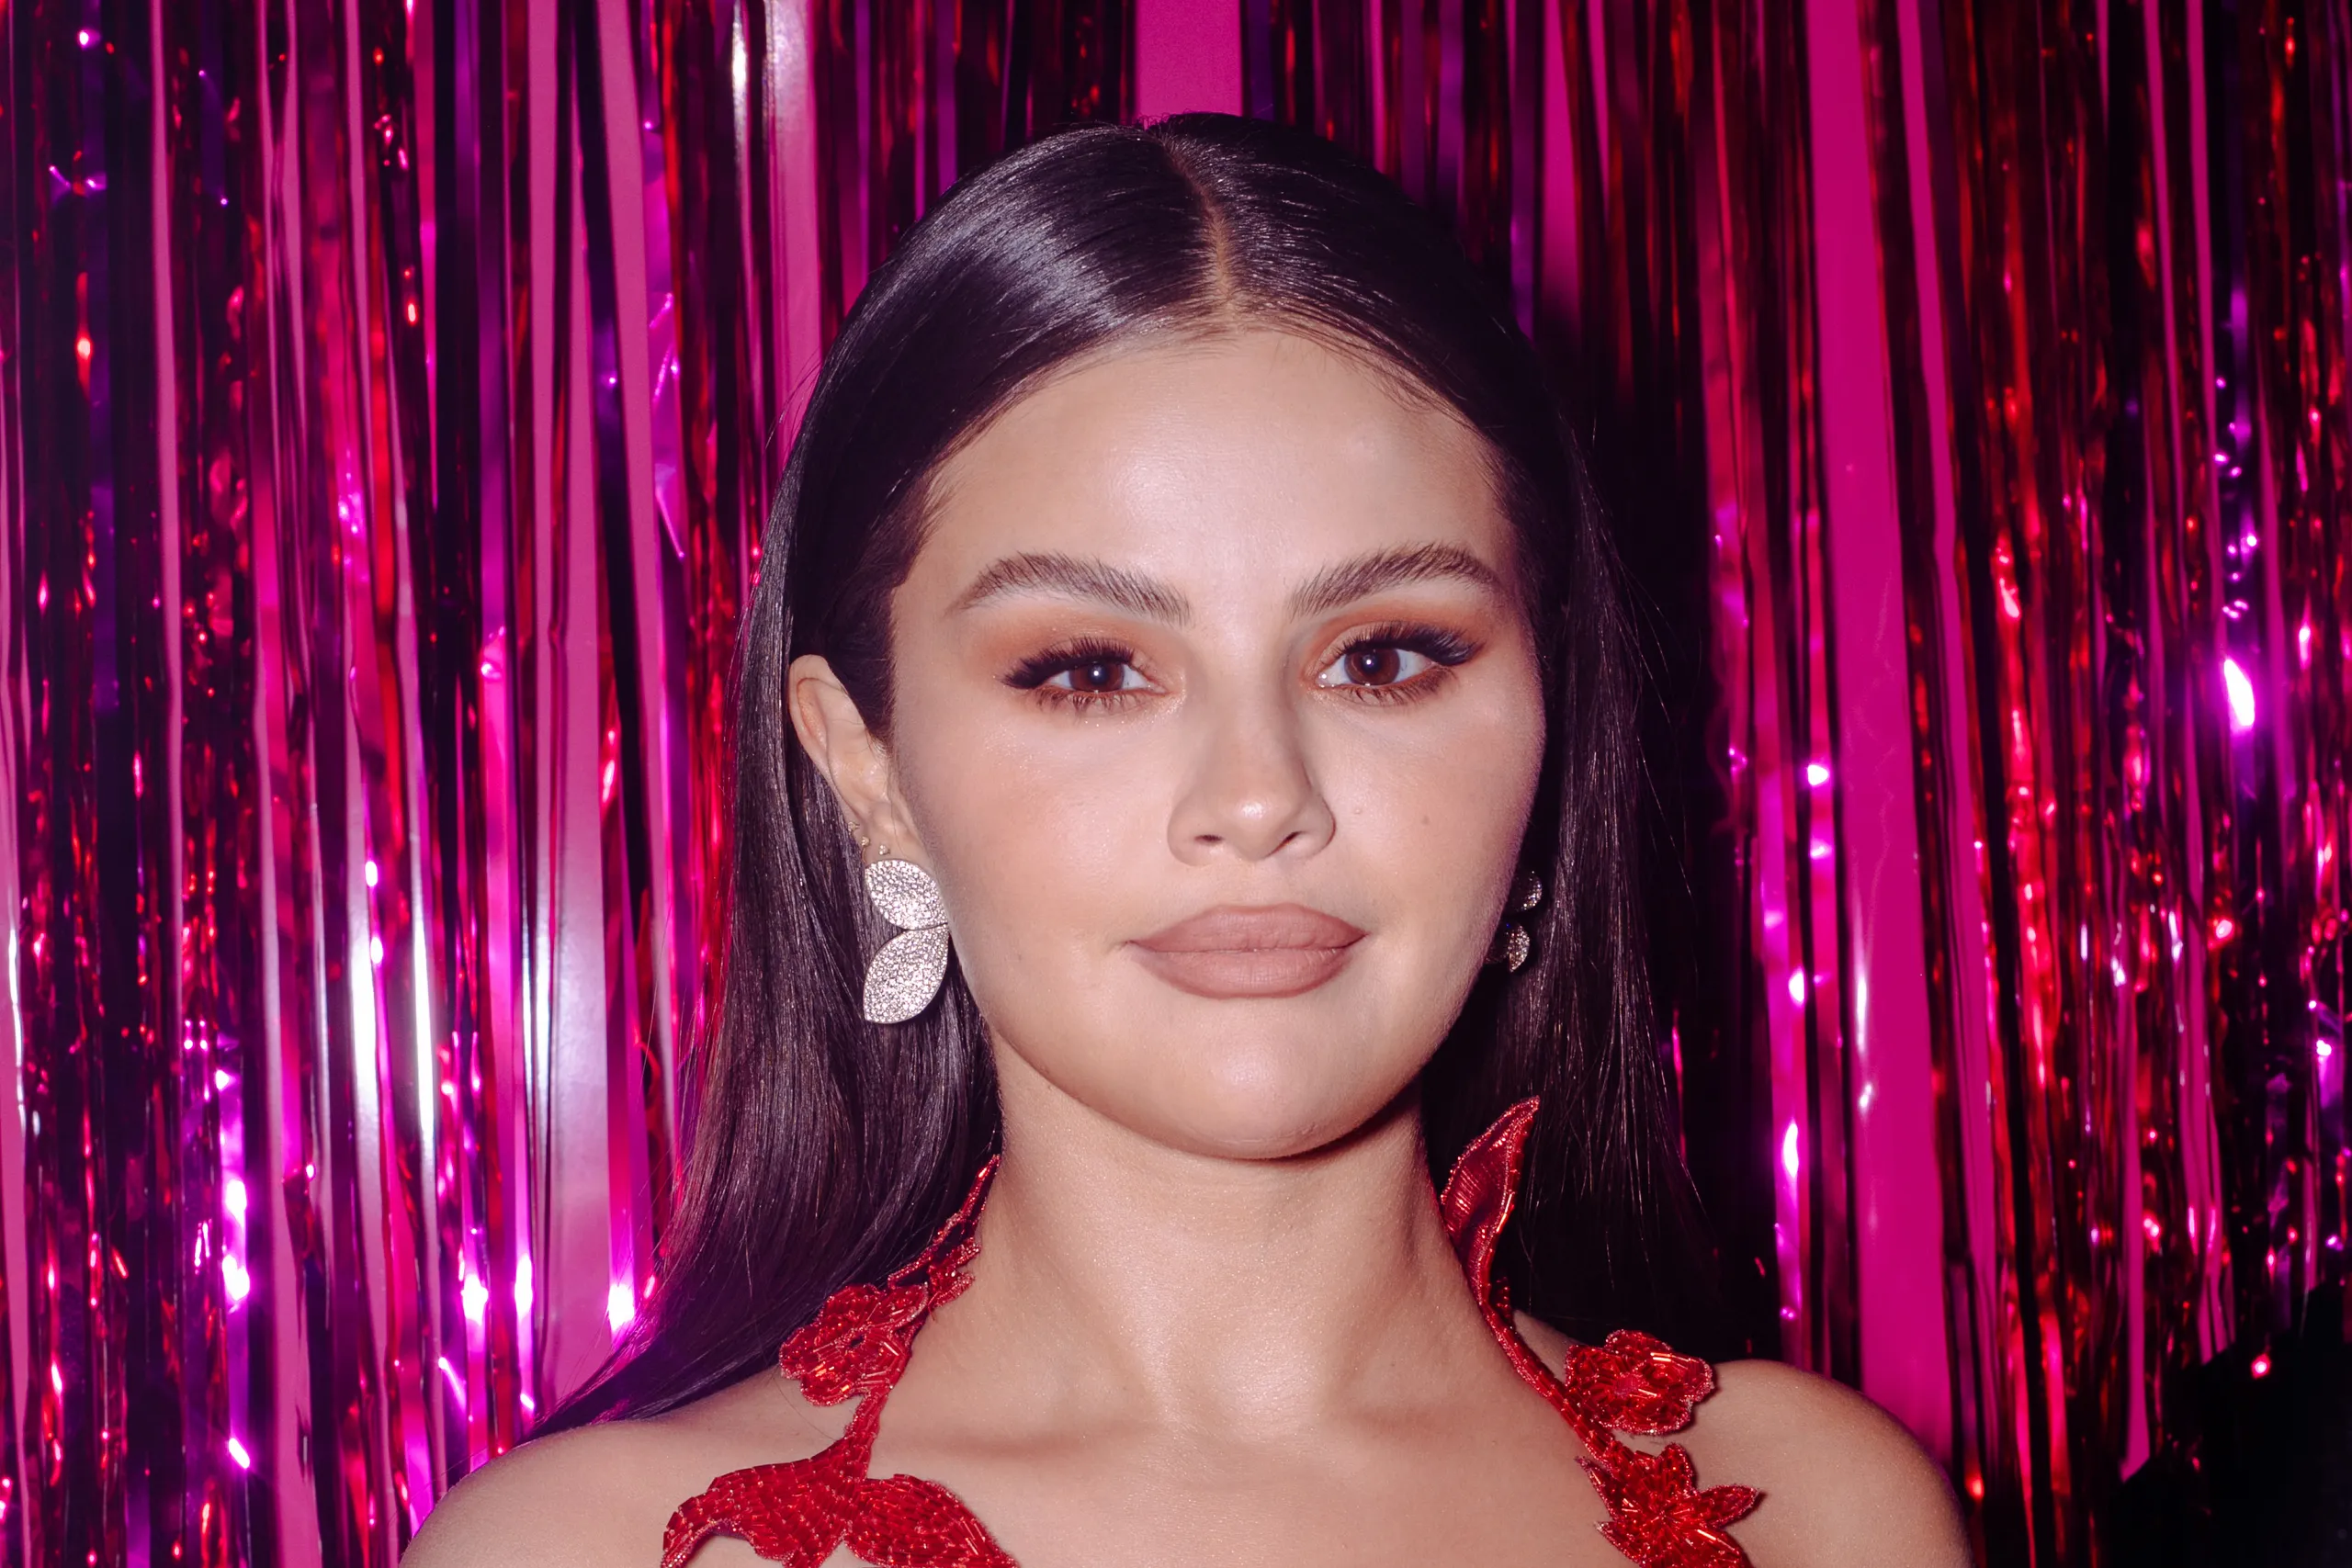 The Hidden Facts Behind Selena Gomez Plastic Surgeries, Nose Surgery, Breast Implant, Teeth Surgery